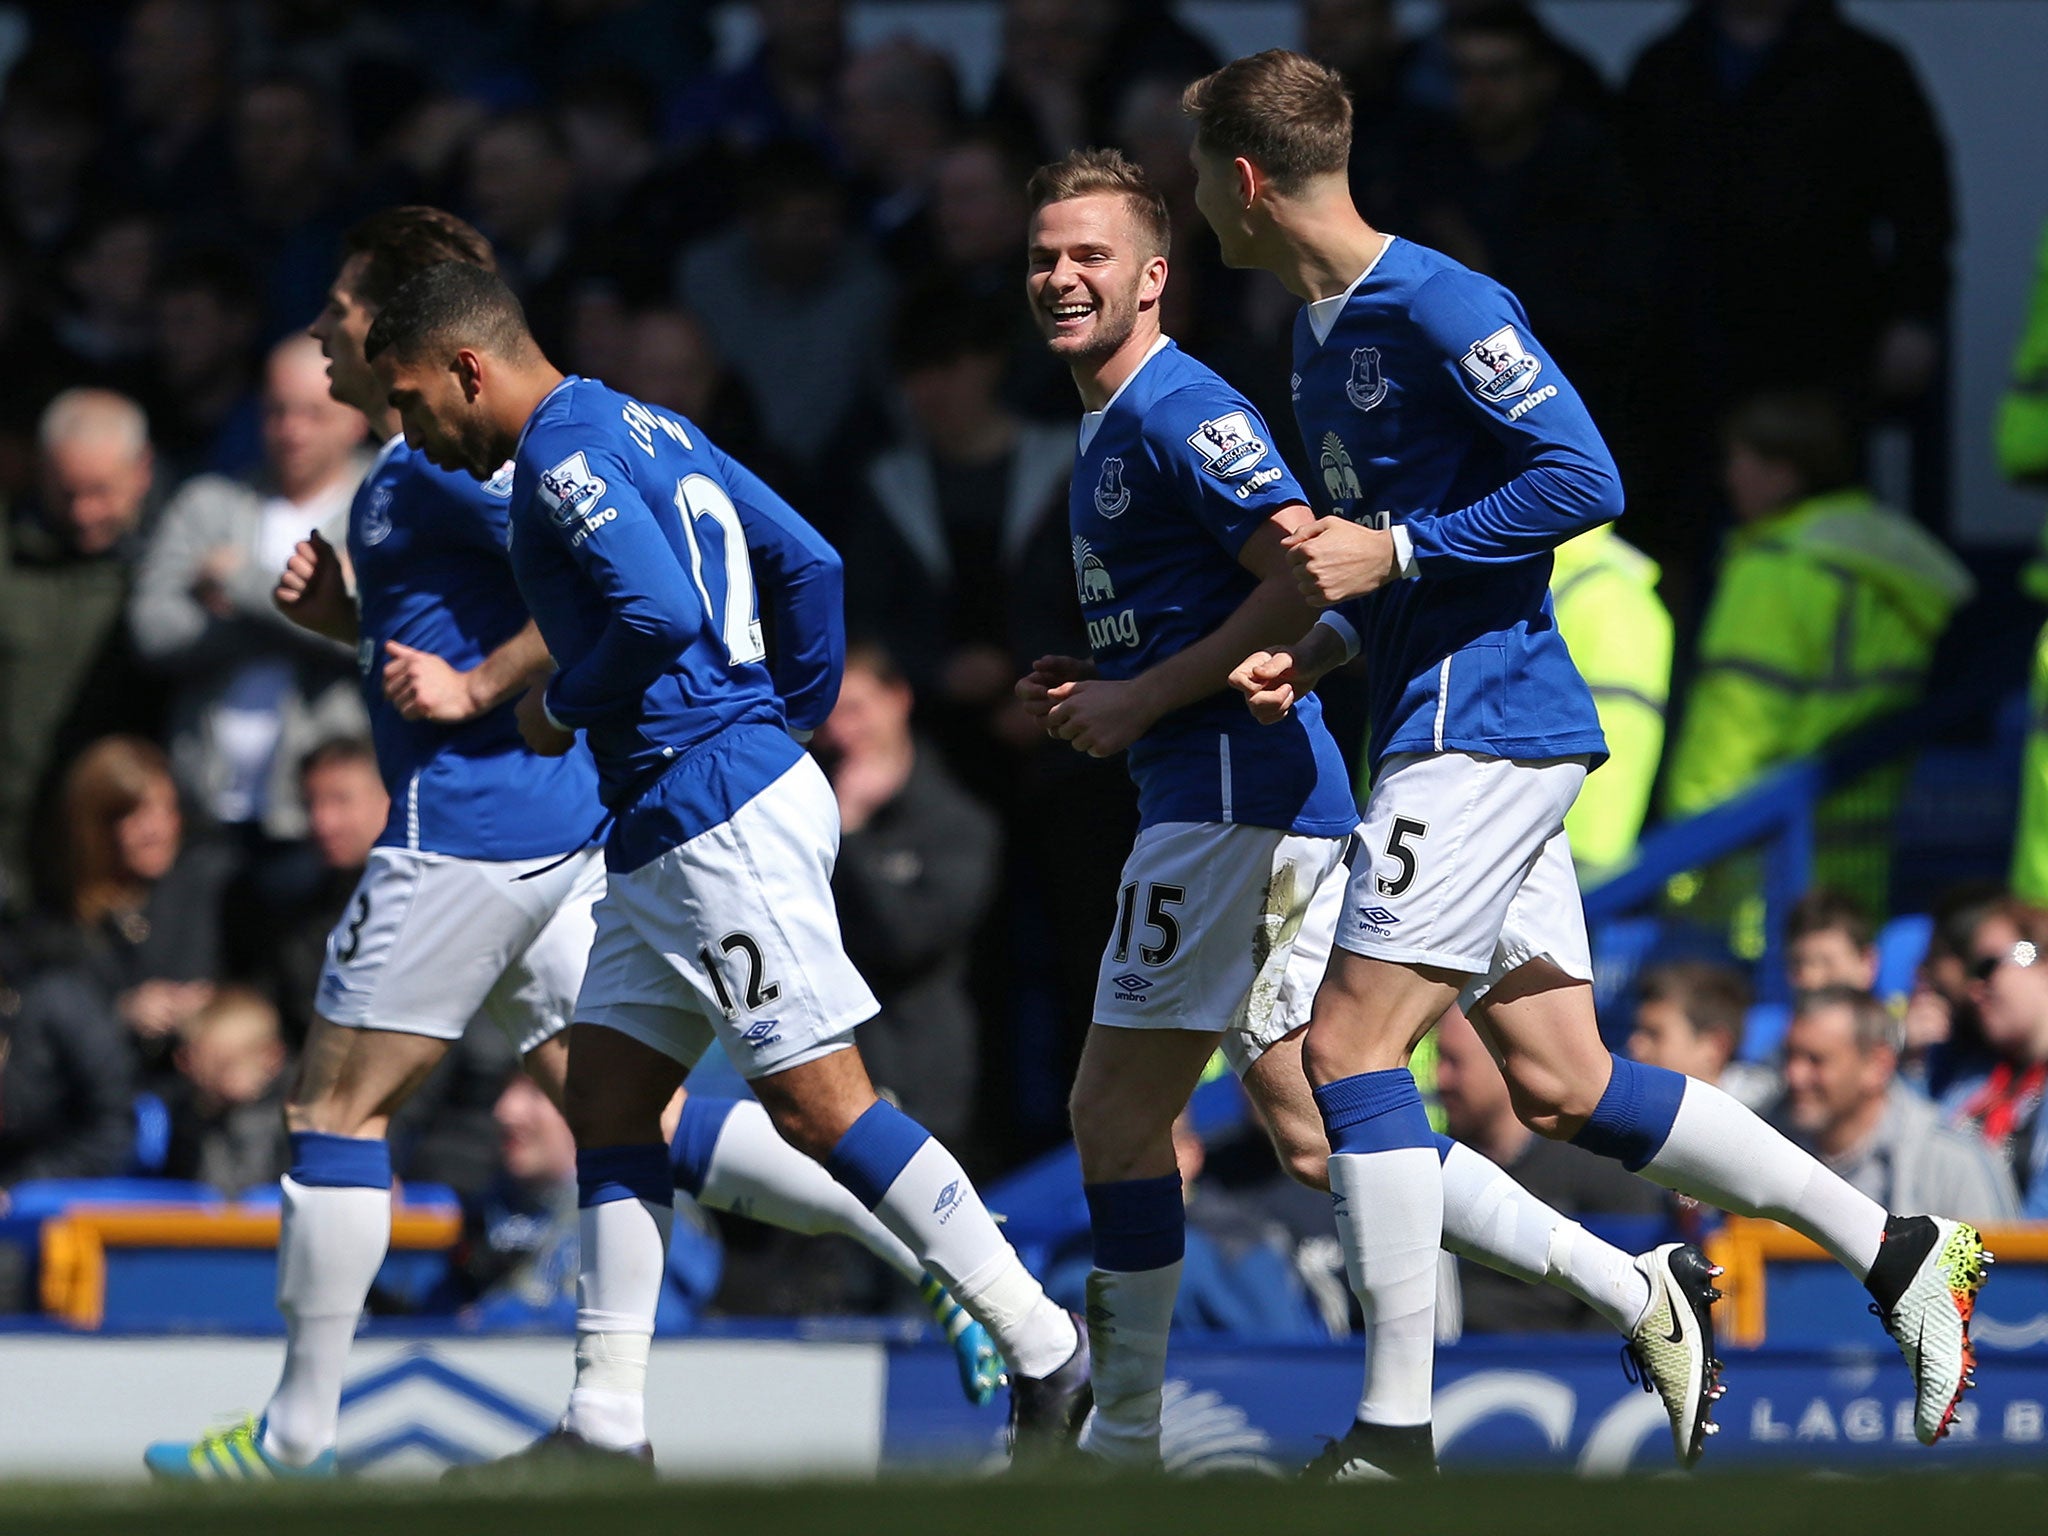 Tom Cleverley celebrates scoring for Everton against Bournemouth